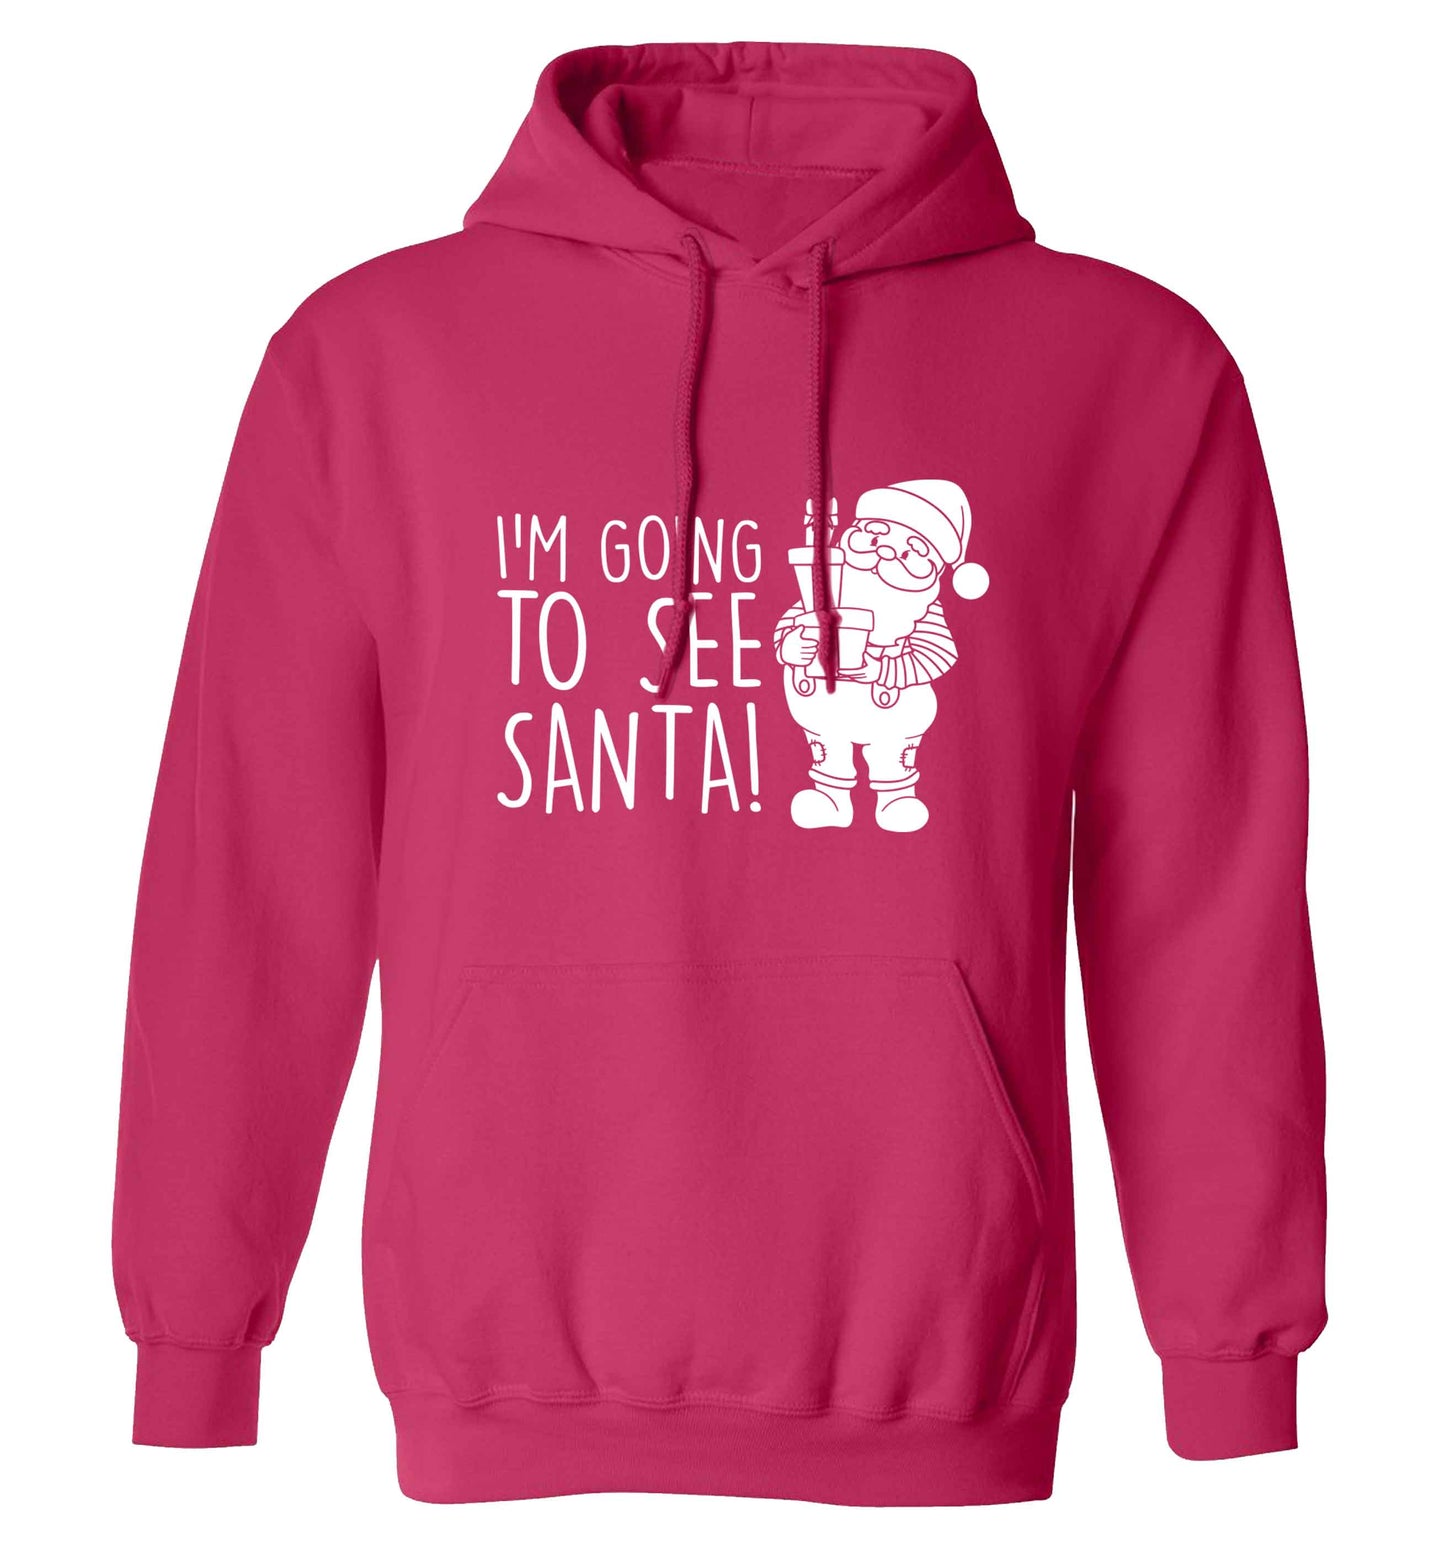 Merry Christmas adults unisex pink hoodie 2XL